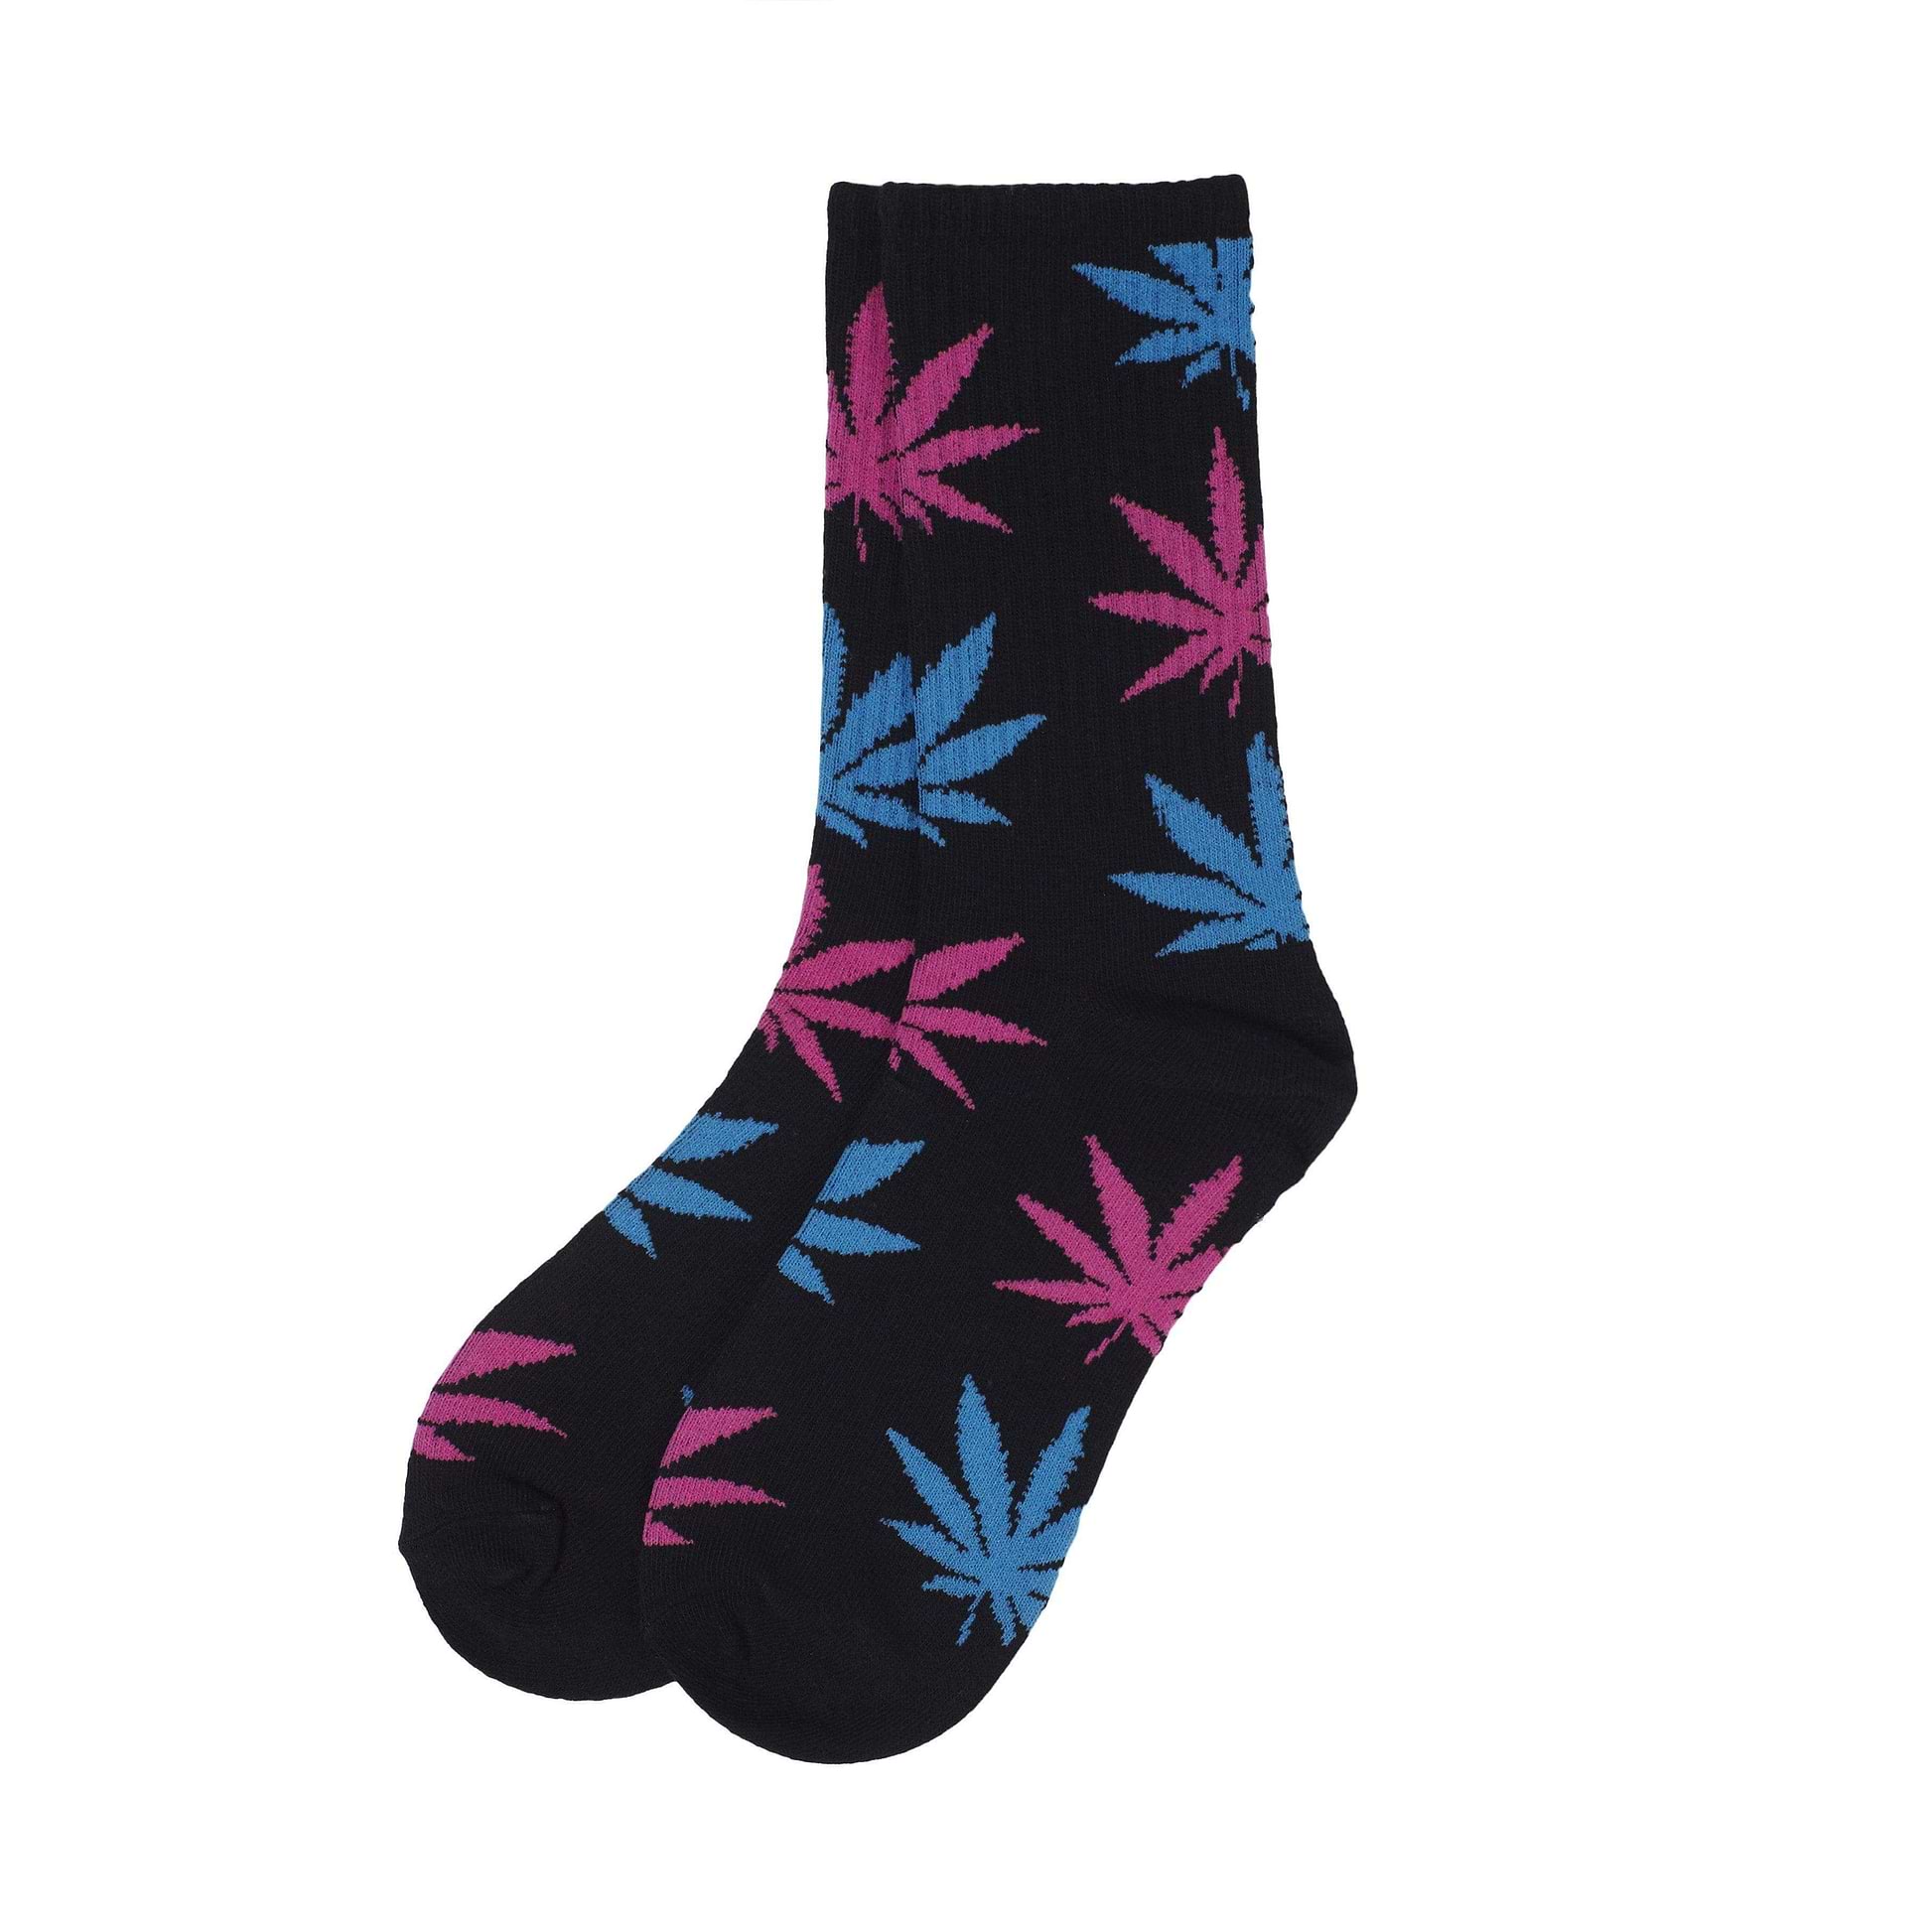 A pair of colorful adult socks footwear with funky Retro weed leaf design